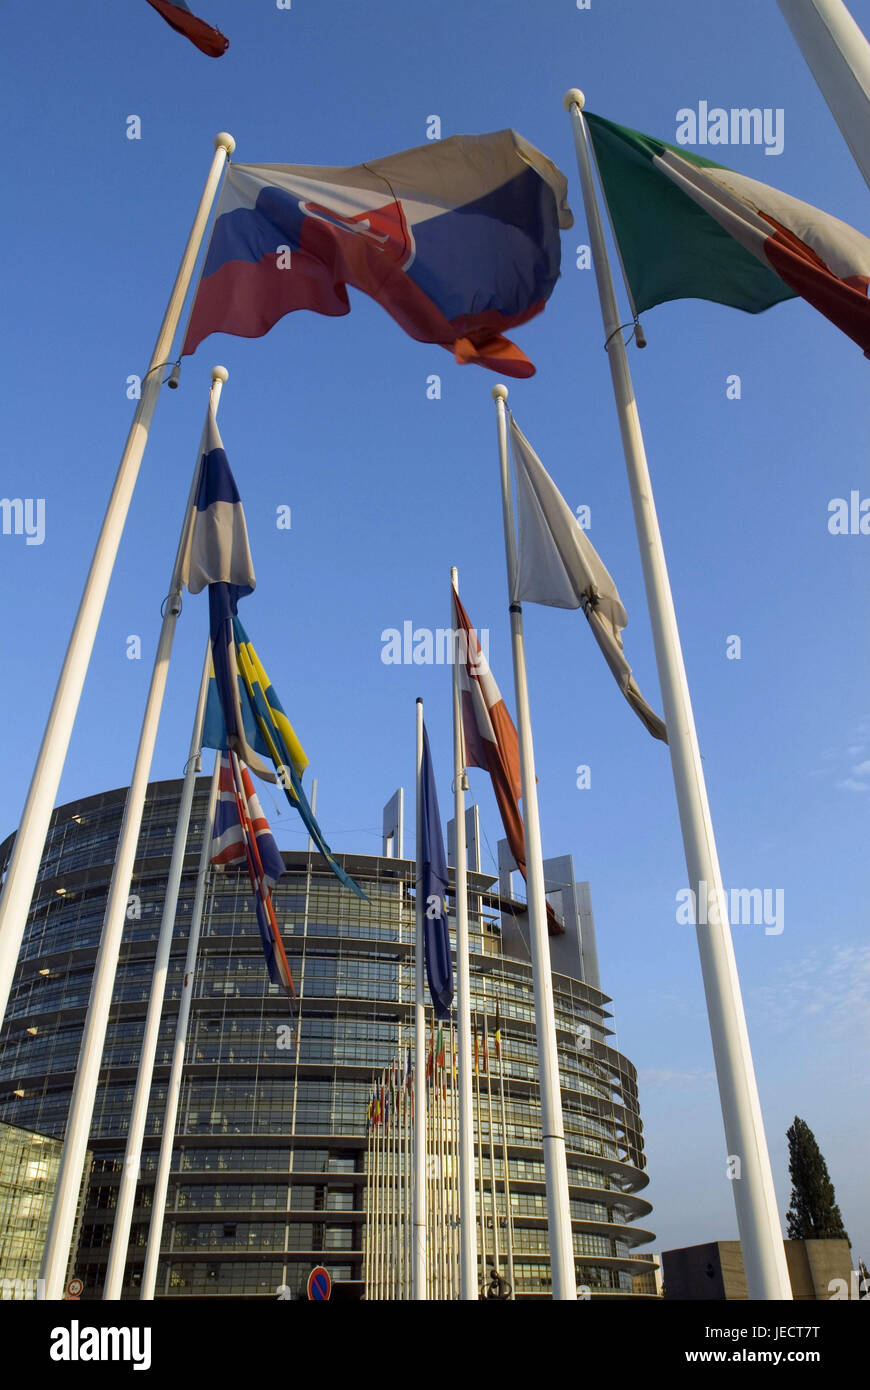 France, Alsace, Strasbourg, European Parliament, chamber of deputies, flags, detail, Europe, architecture, building, structure, glass front, flags, nations, passed away, blow, European, flagpoles, glass front, construction, outside, deserted, Stock Photo